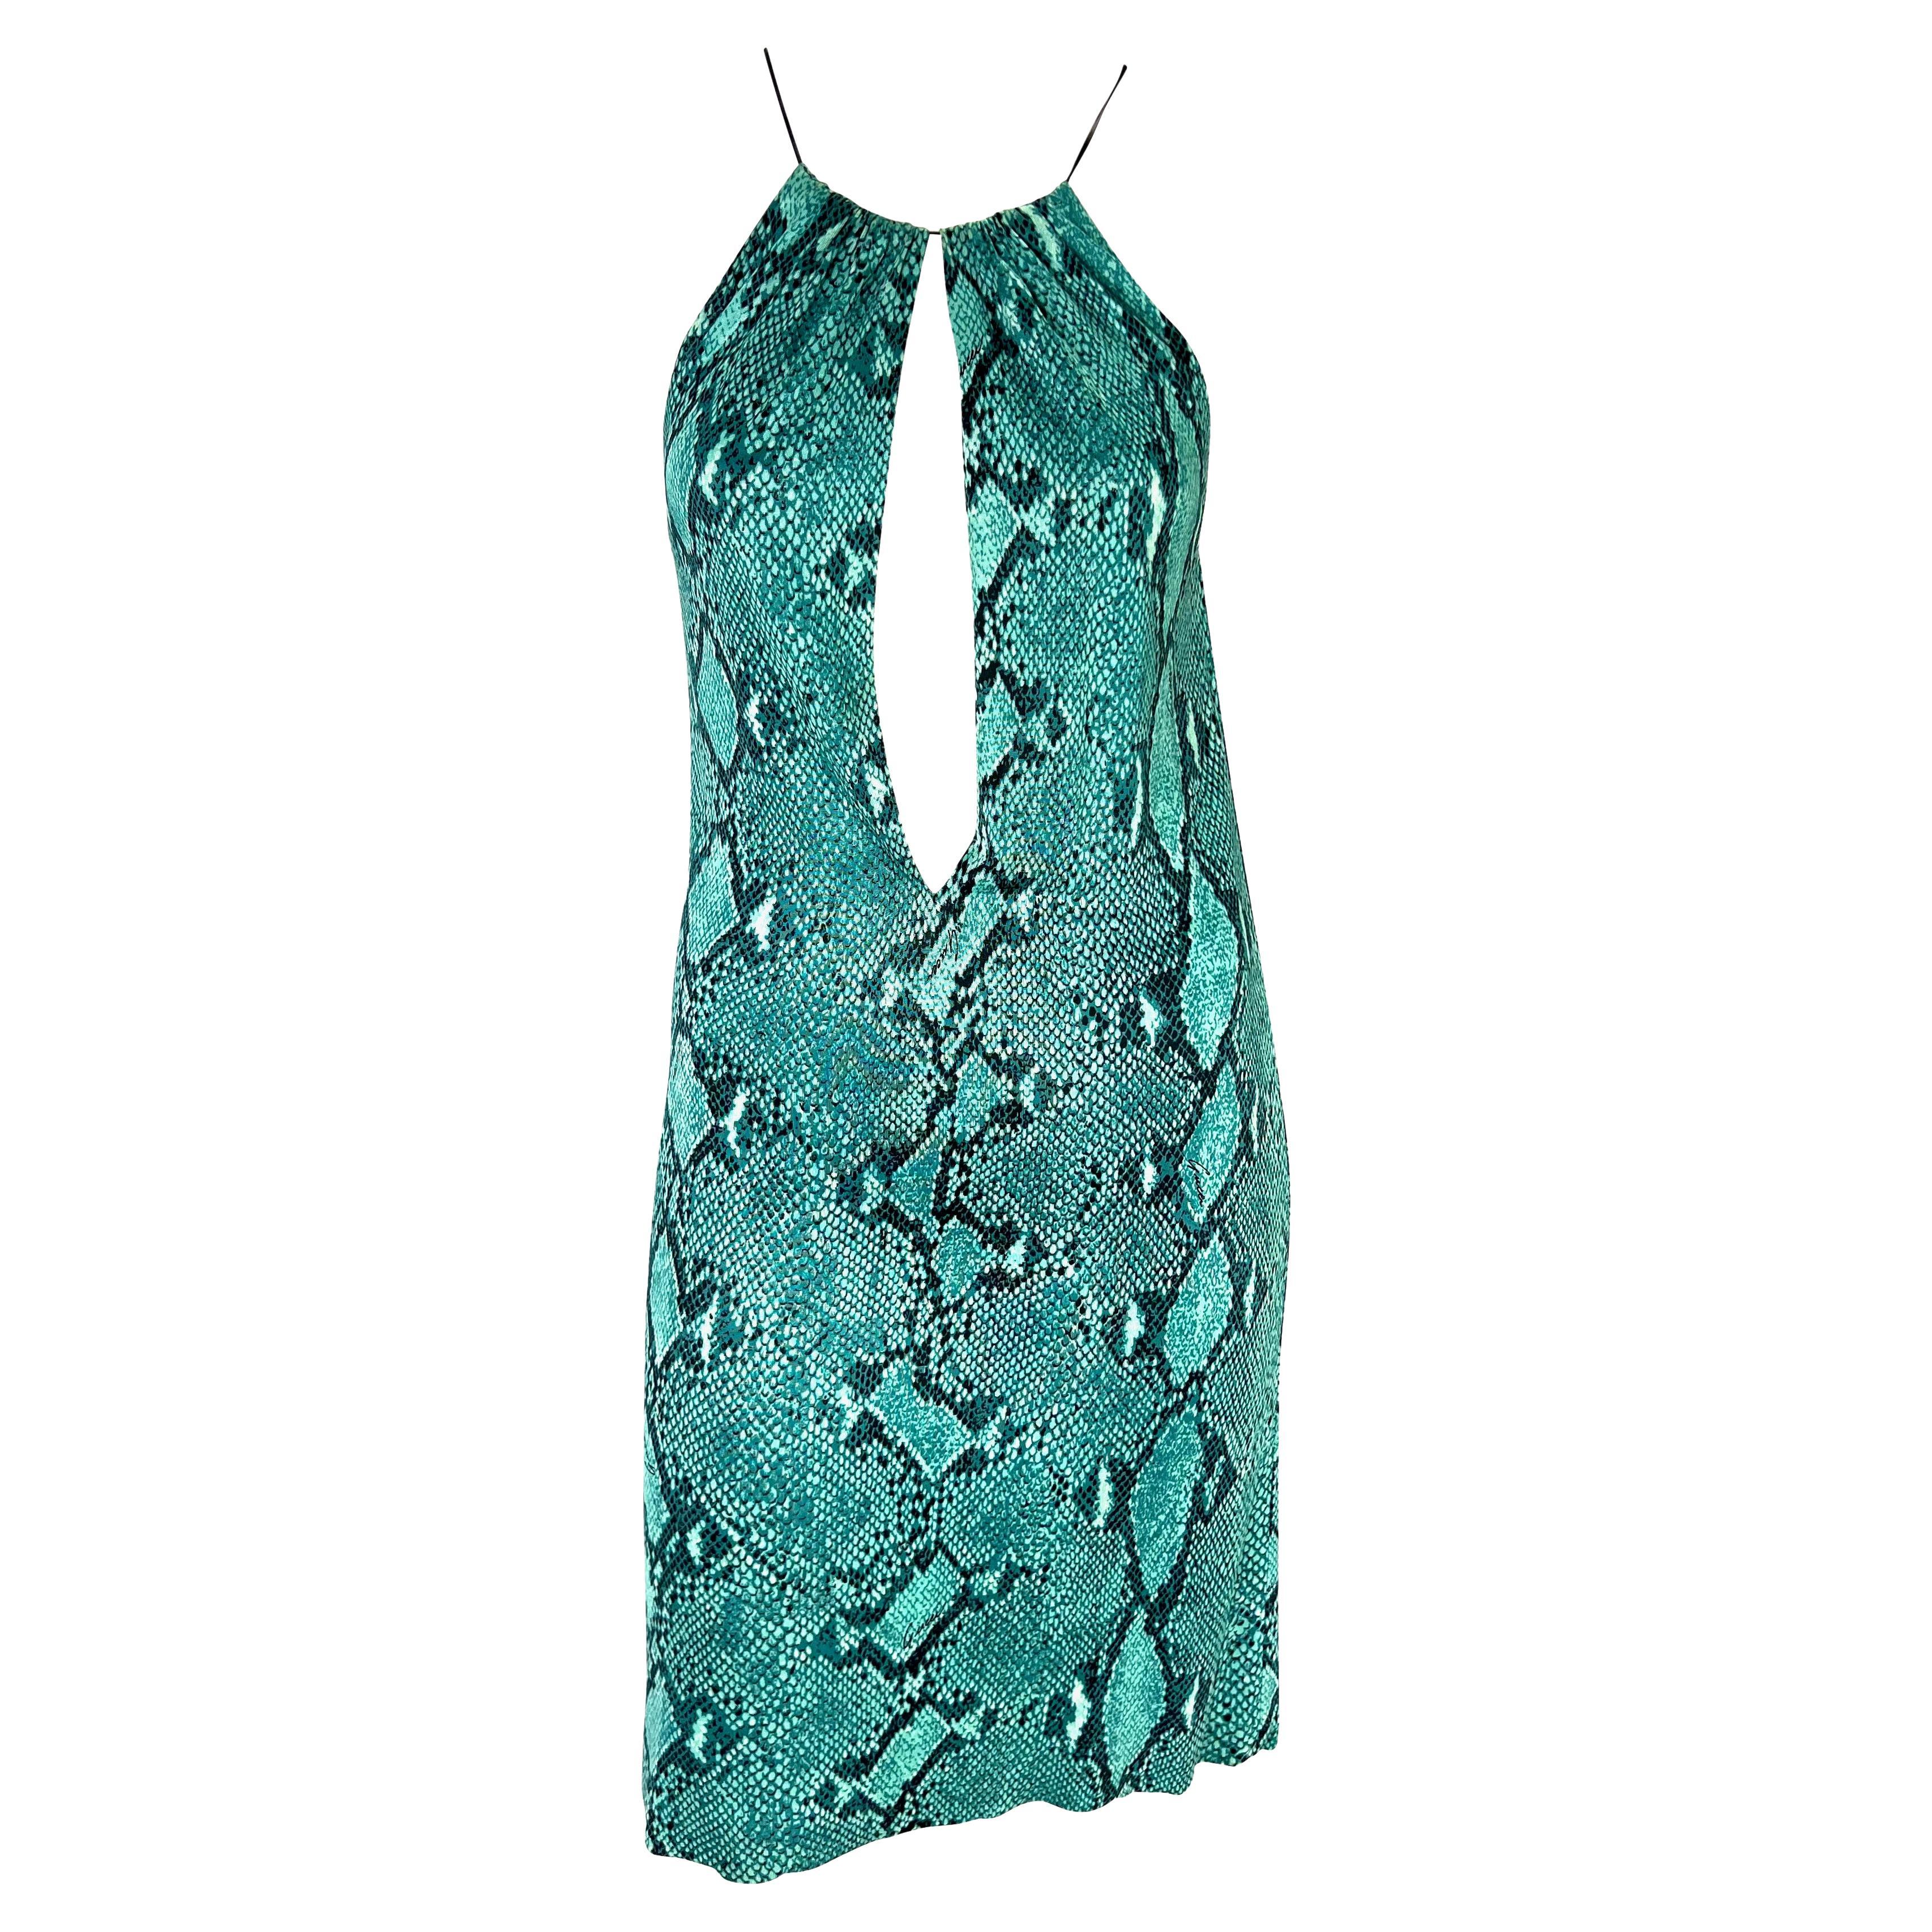 S/S 2000 Gucci by Tom Ford Blue Snake Print Viscose Leather Strap Plunging Dress For Sale